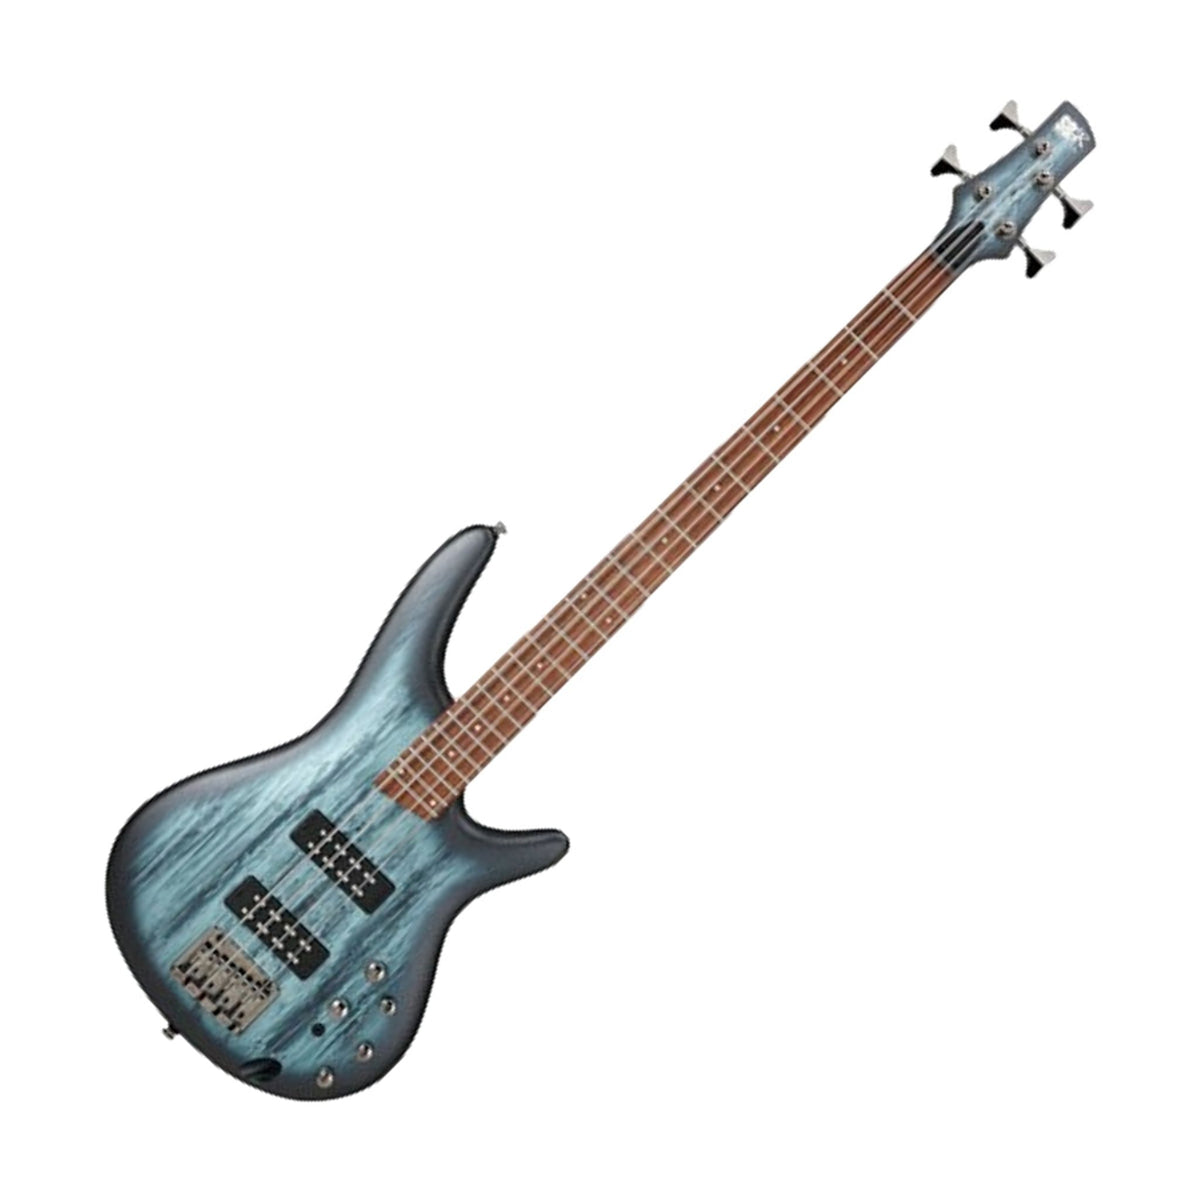 The Ibanez SR300ES Electric Bass belobgs to the SR series which for the past 30 years has given bass players a modern alternative.